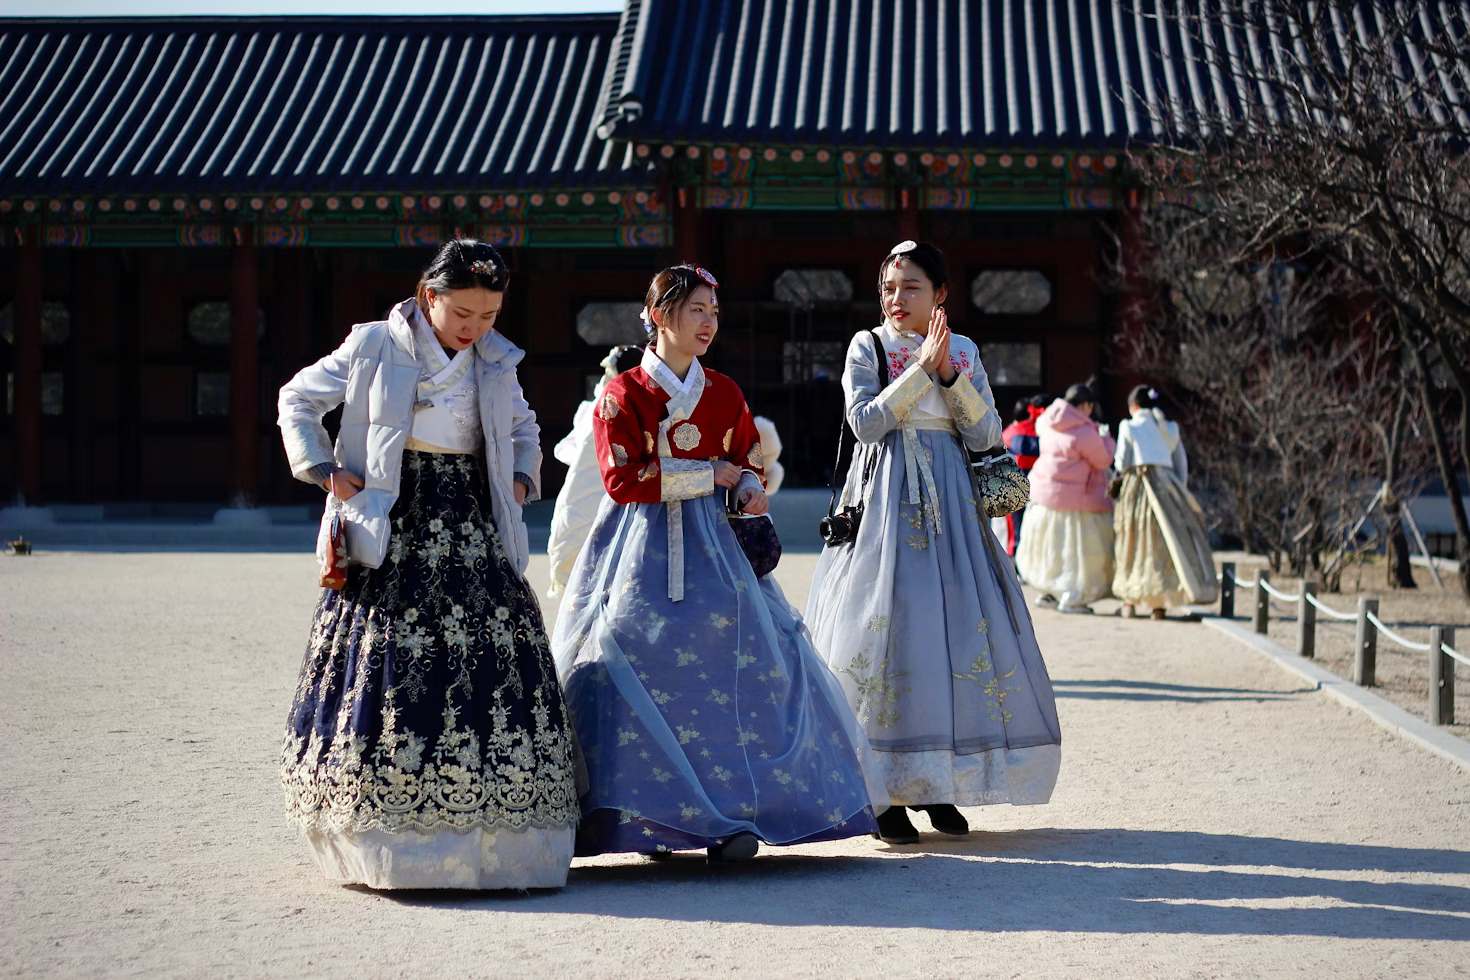 One woman wearing a padded jacket over her hanbok